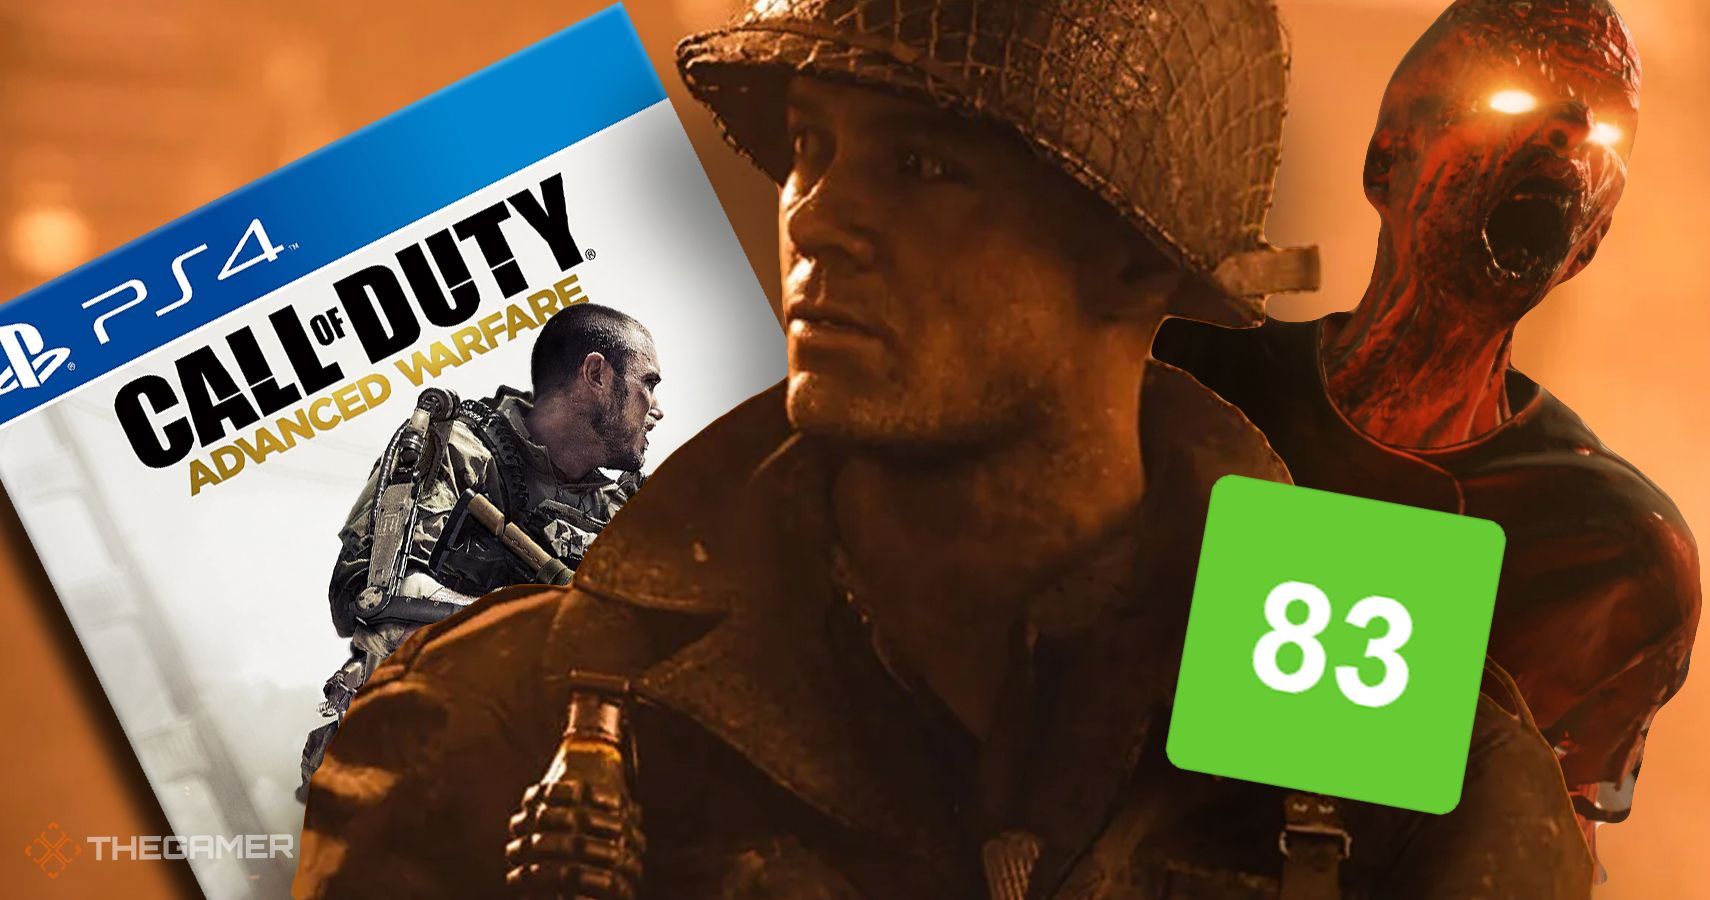 Every Sledgehammer Call Of Duty Game Ranked, According To Metacritic